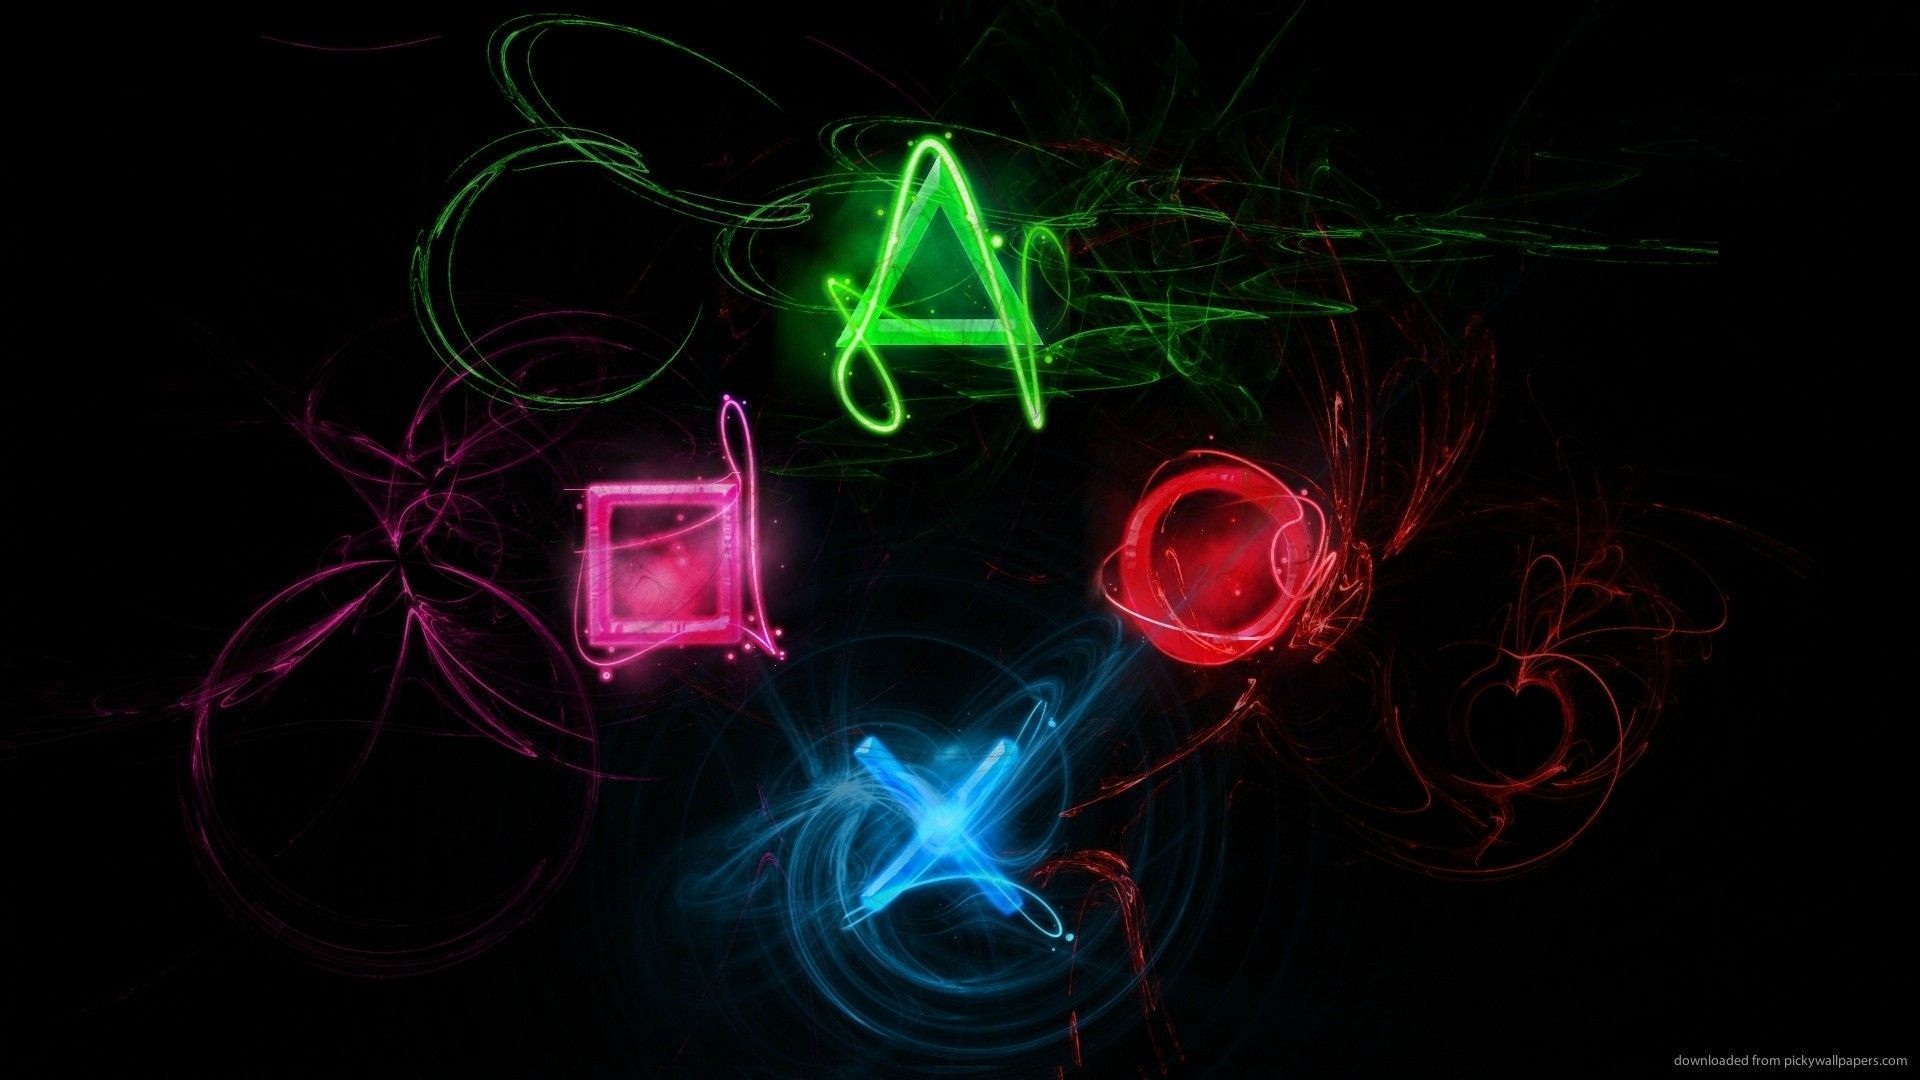 PS4 Controller Wallpaper Free PS4 Controller Background